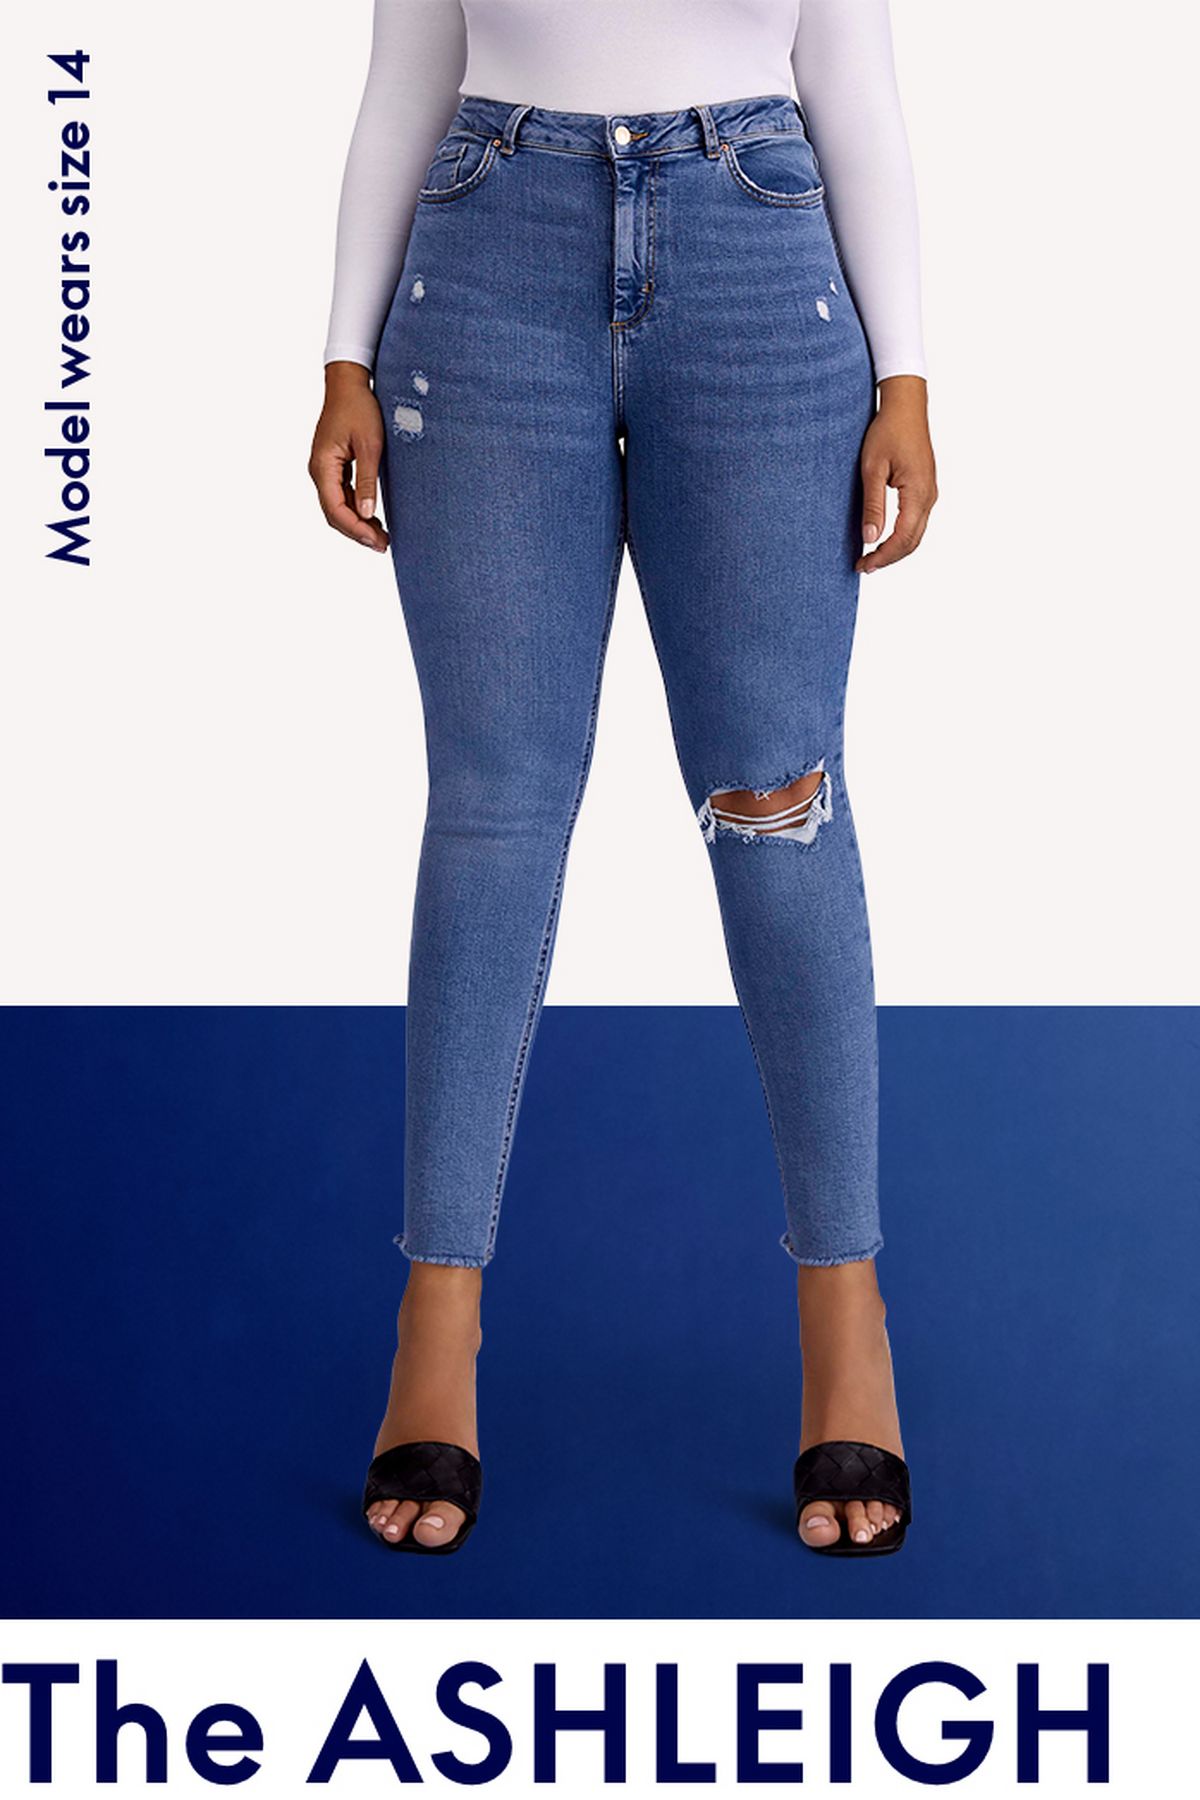 Types of Women's Jeans & Jeans Guide